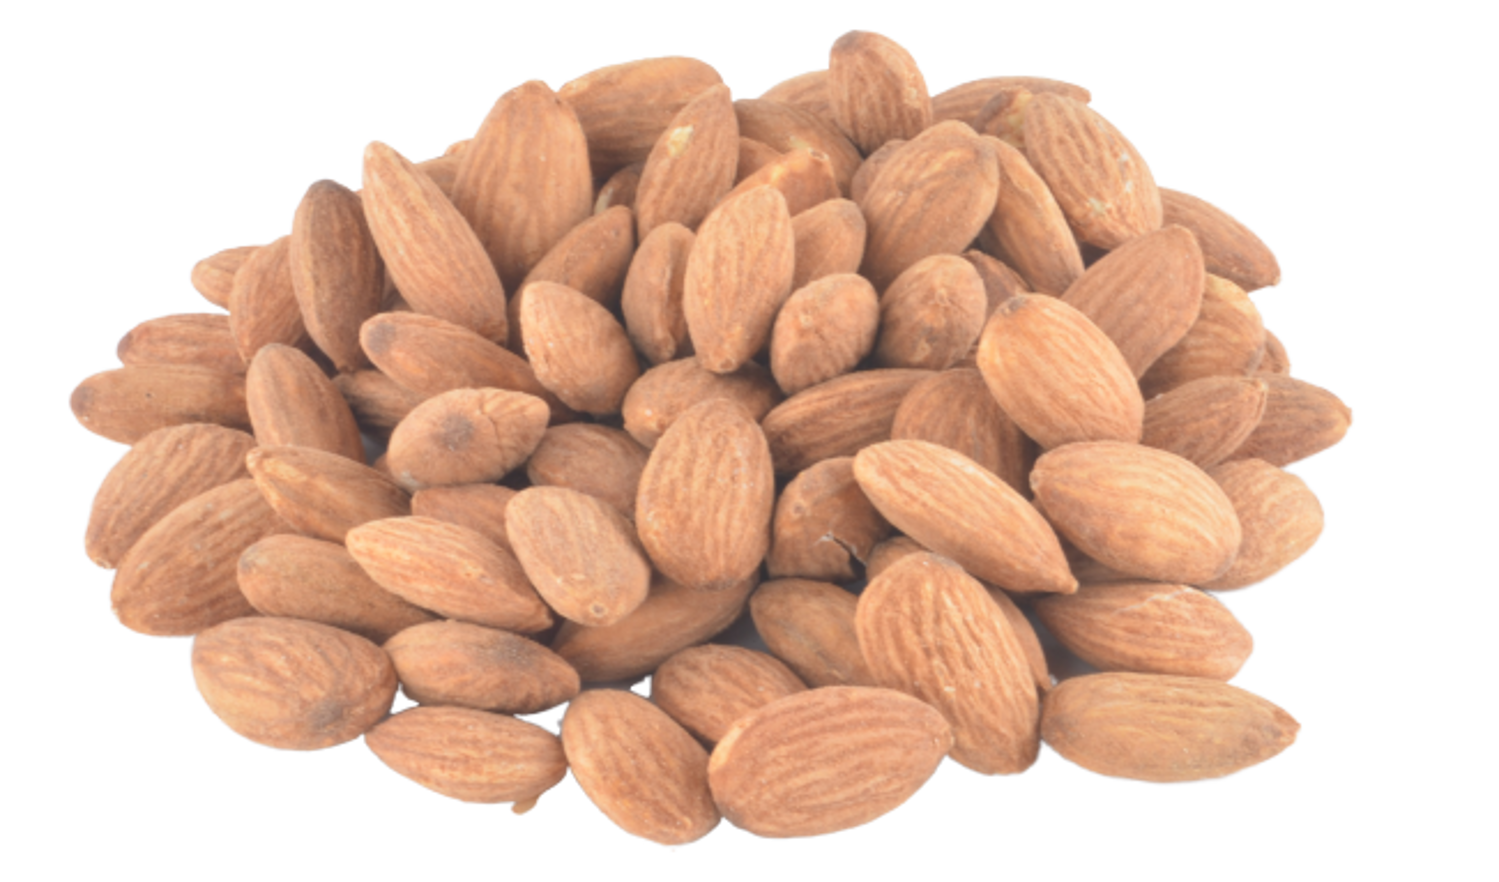 Picture of MEVLANA ALMOND NUTS ROASTED